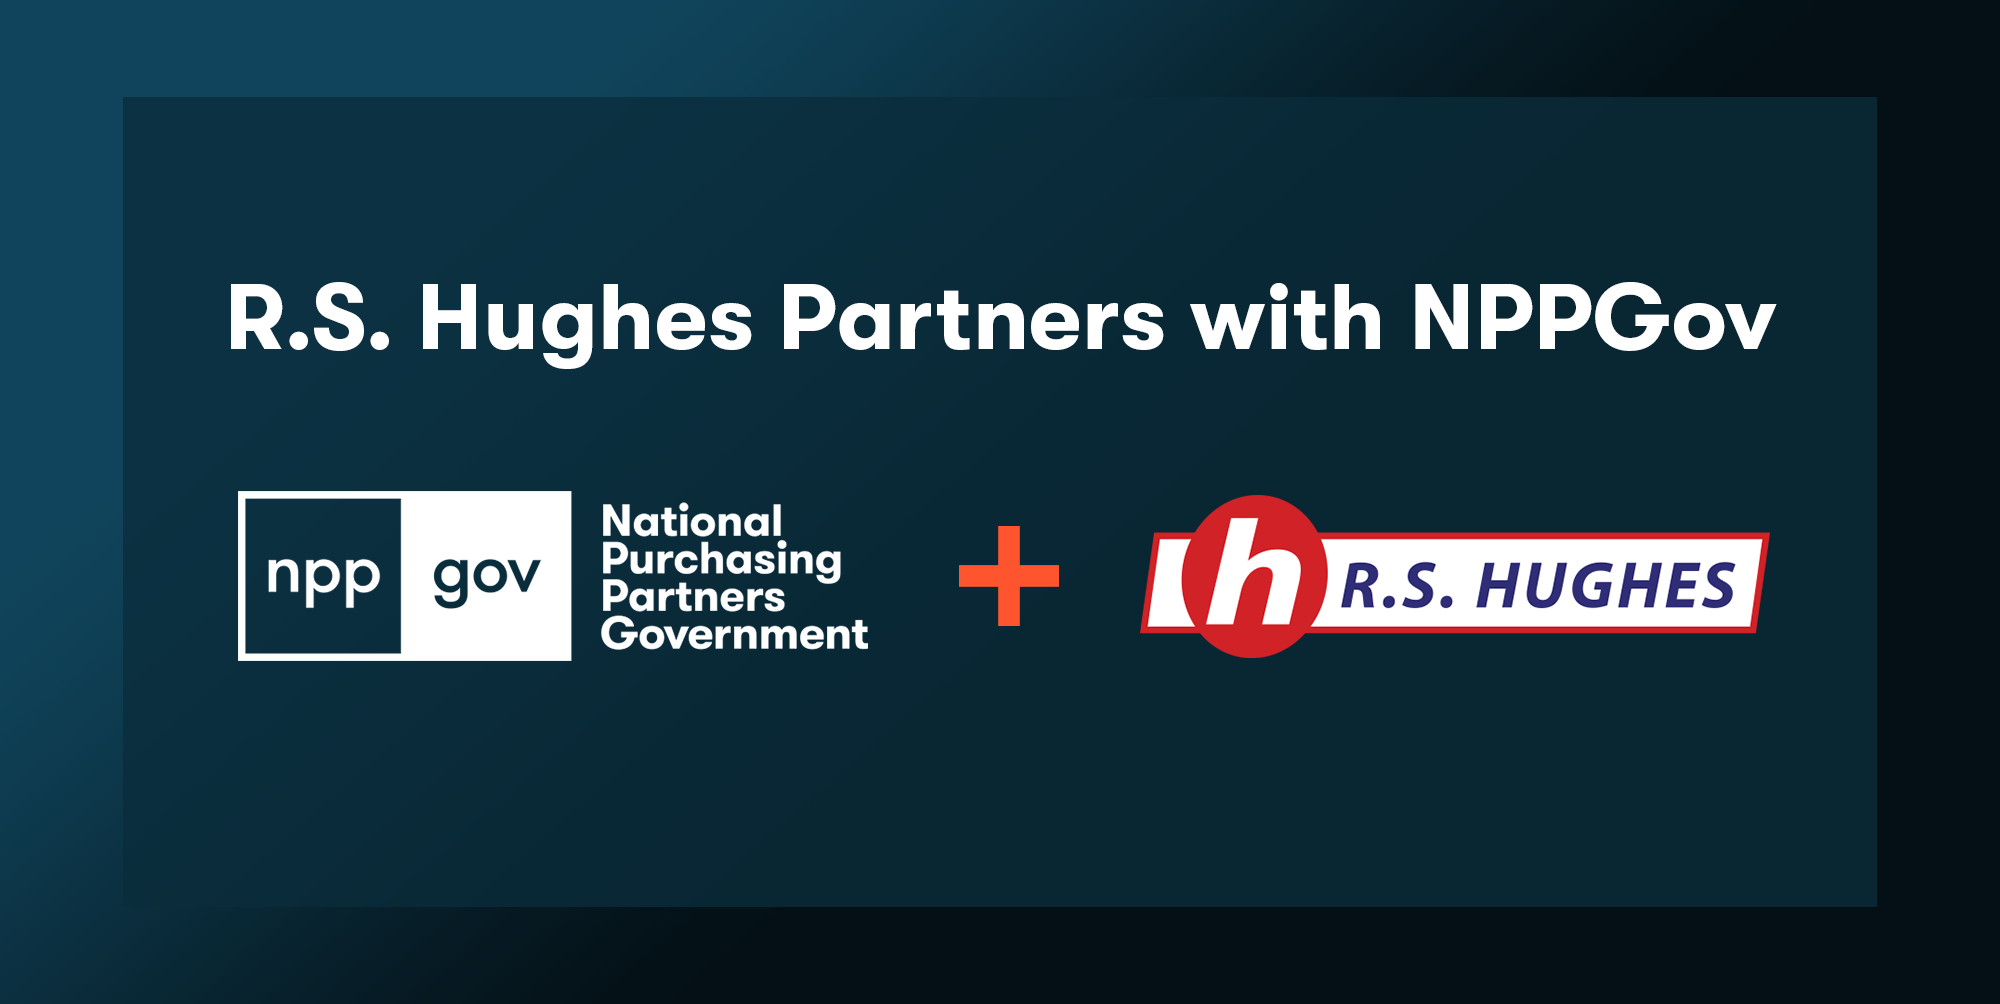 R.S. Hughes Partners with NPPGov